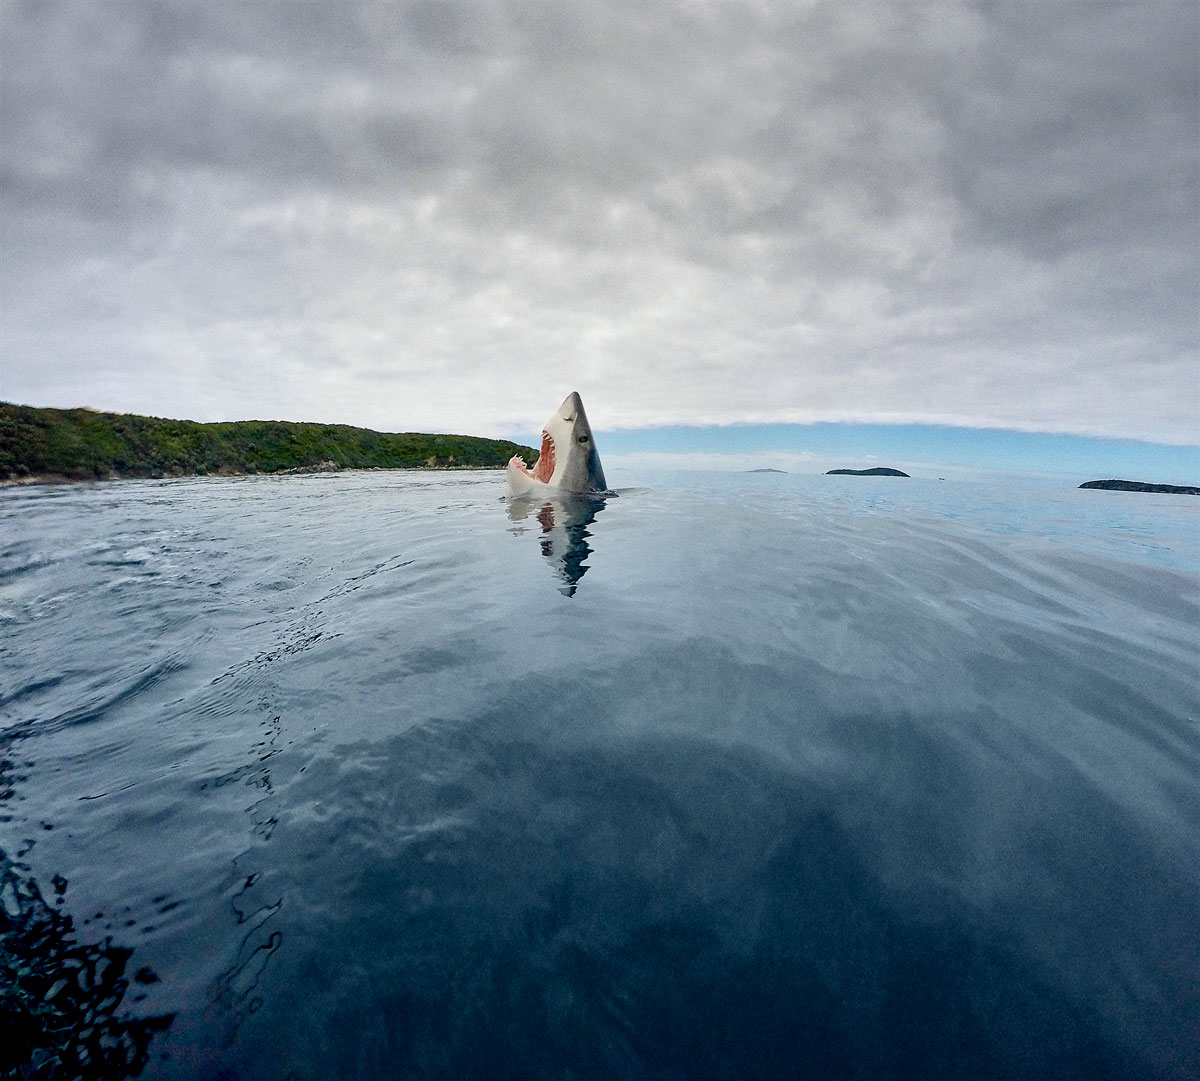 Photograph by Mike Coots of a Great White shark poking head out of water in New Zealand